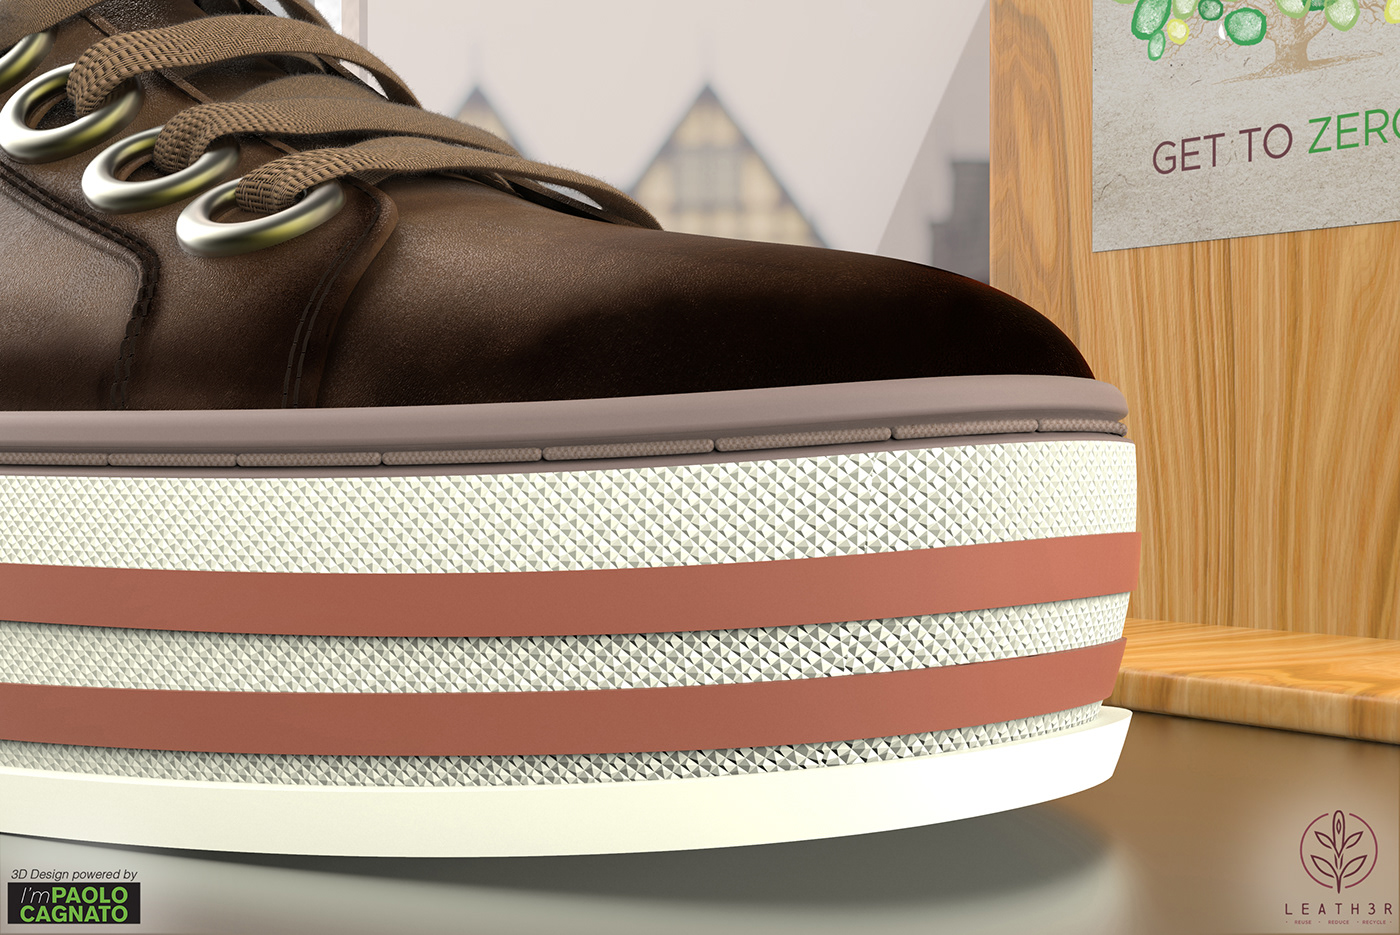 3D footwear leather MADEINITALY recycle reduce rendering reuse shoes Sustainability